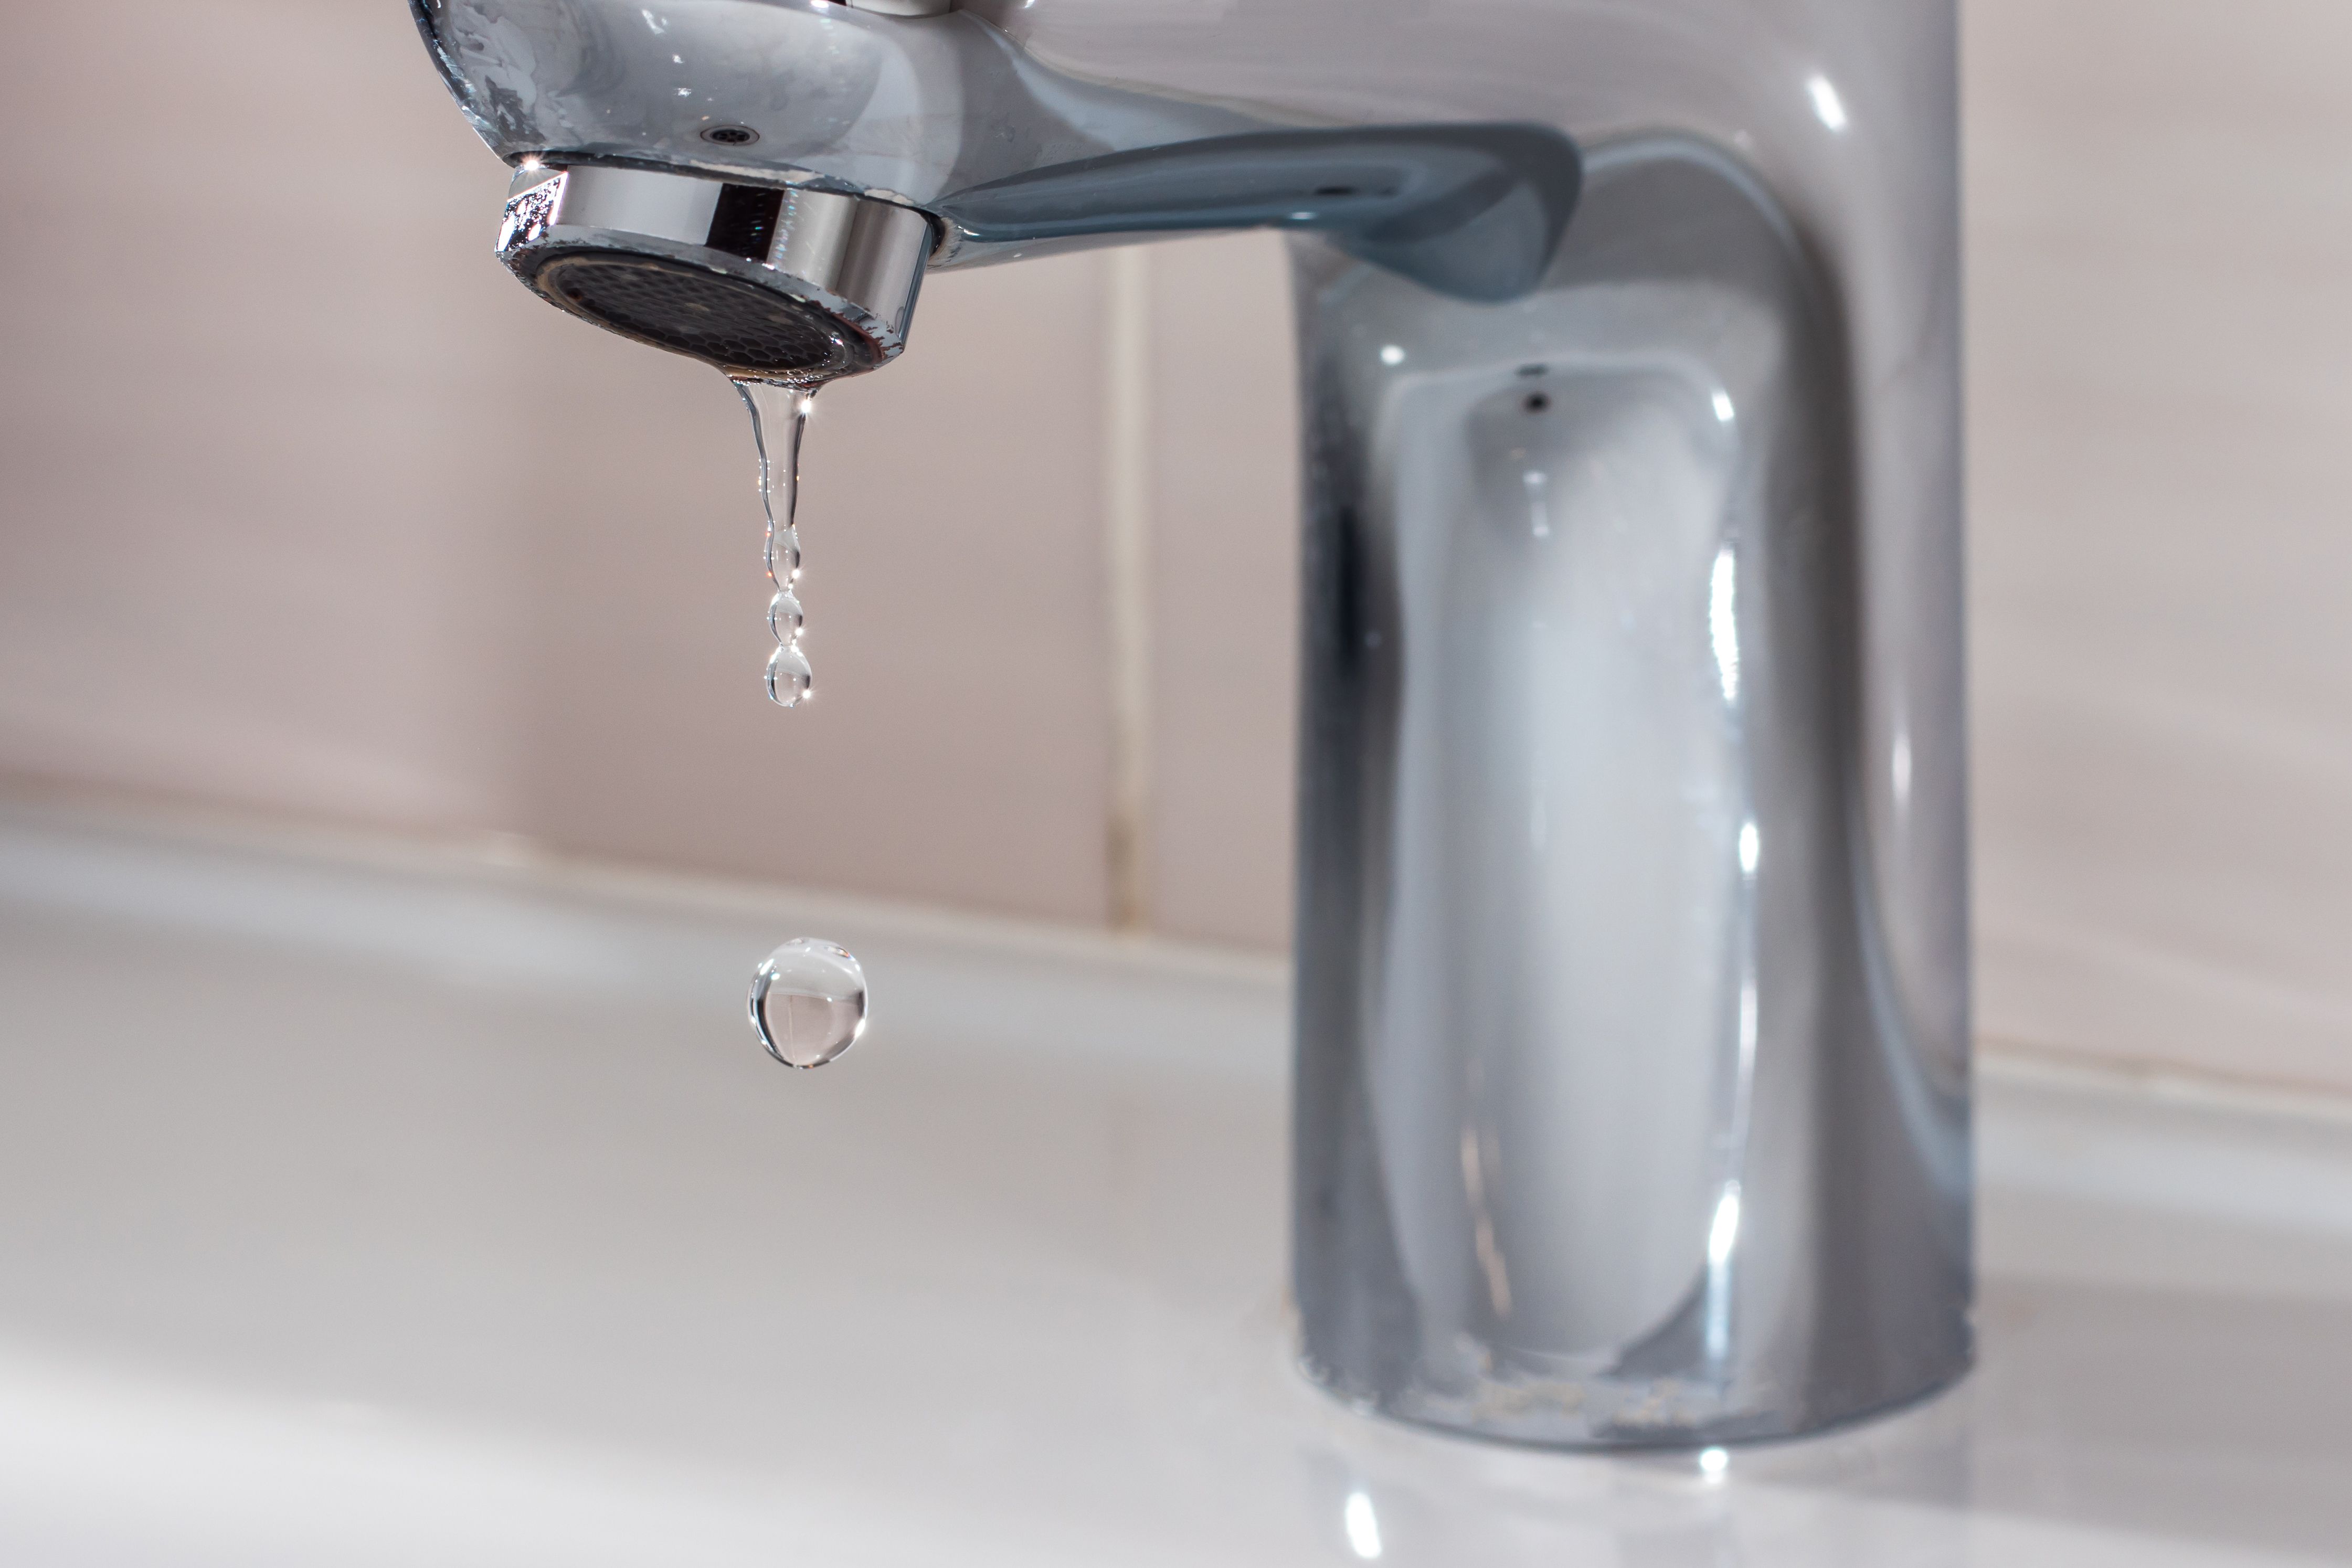 How to Fix a Leaky Faucet - 19 Easy Steps to Fix a Faucet